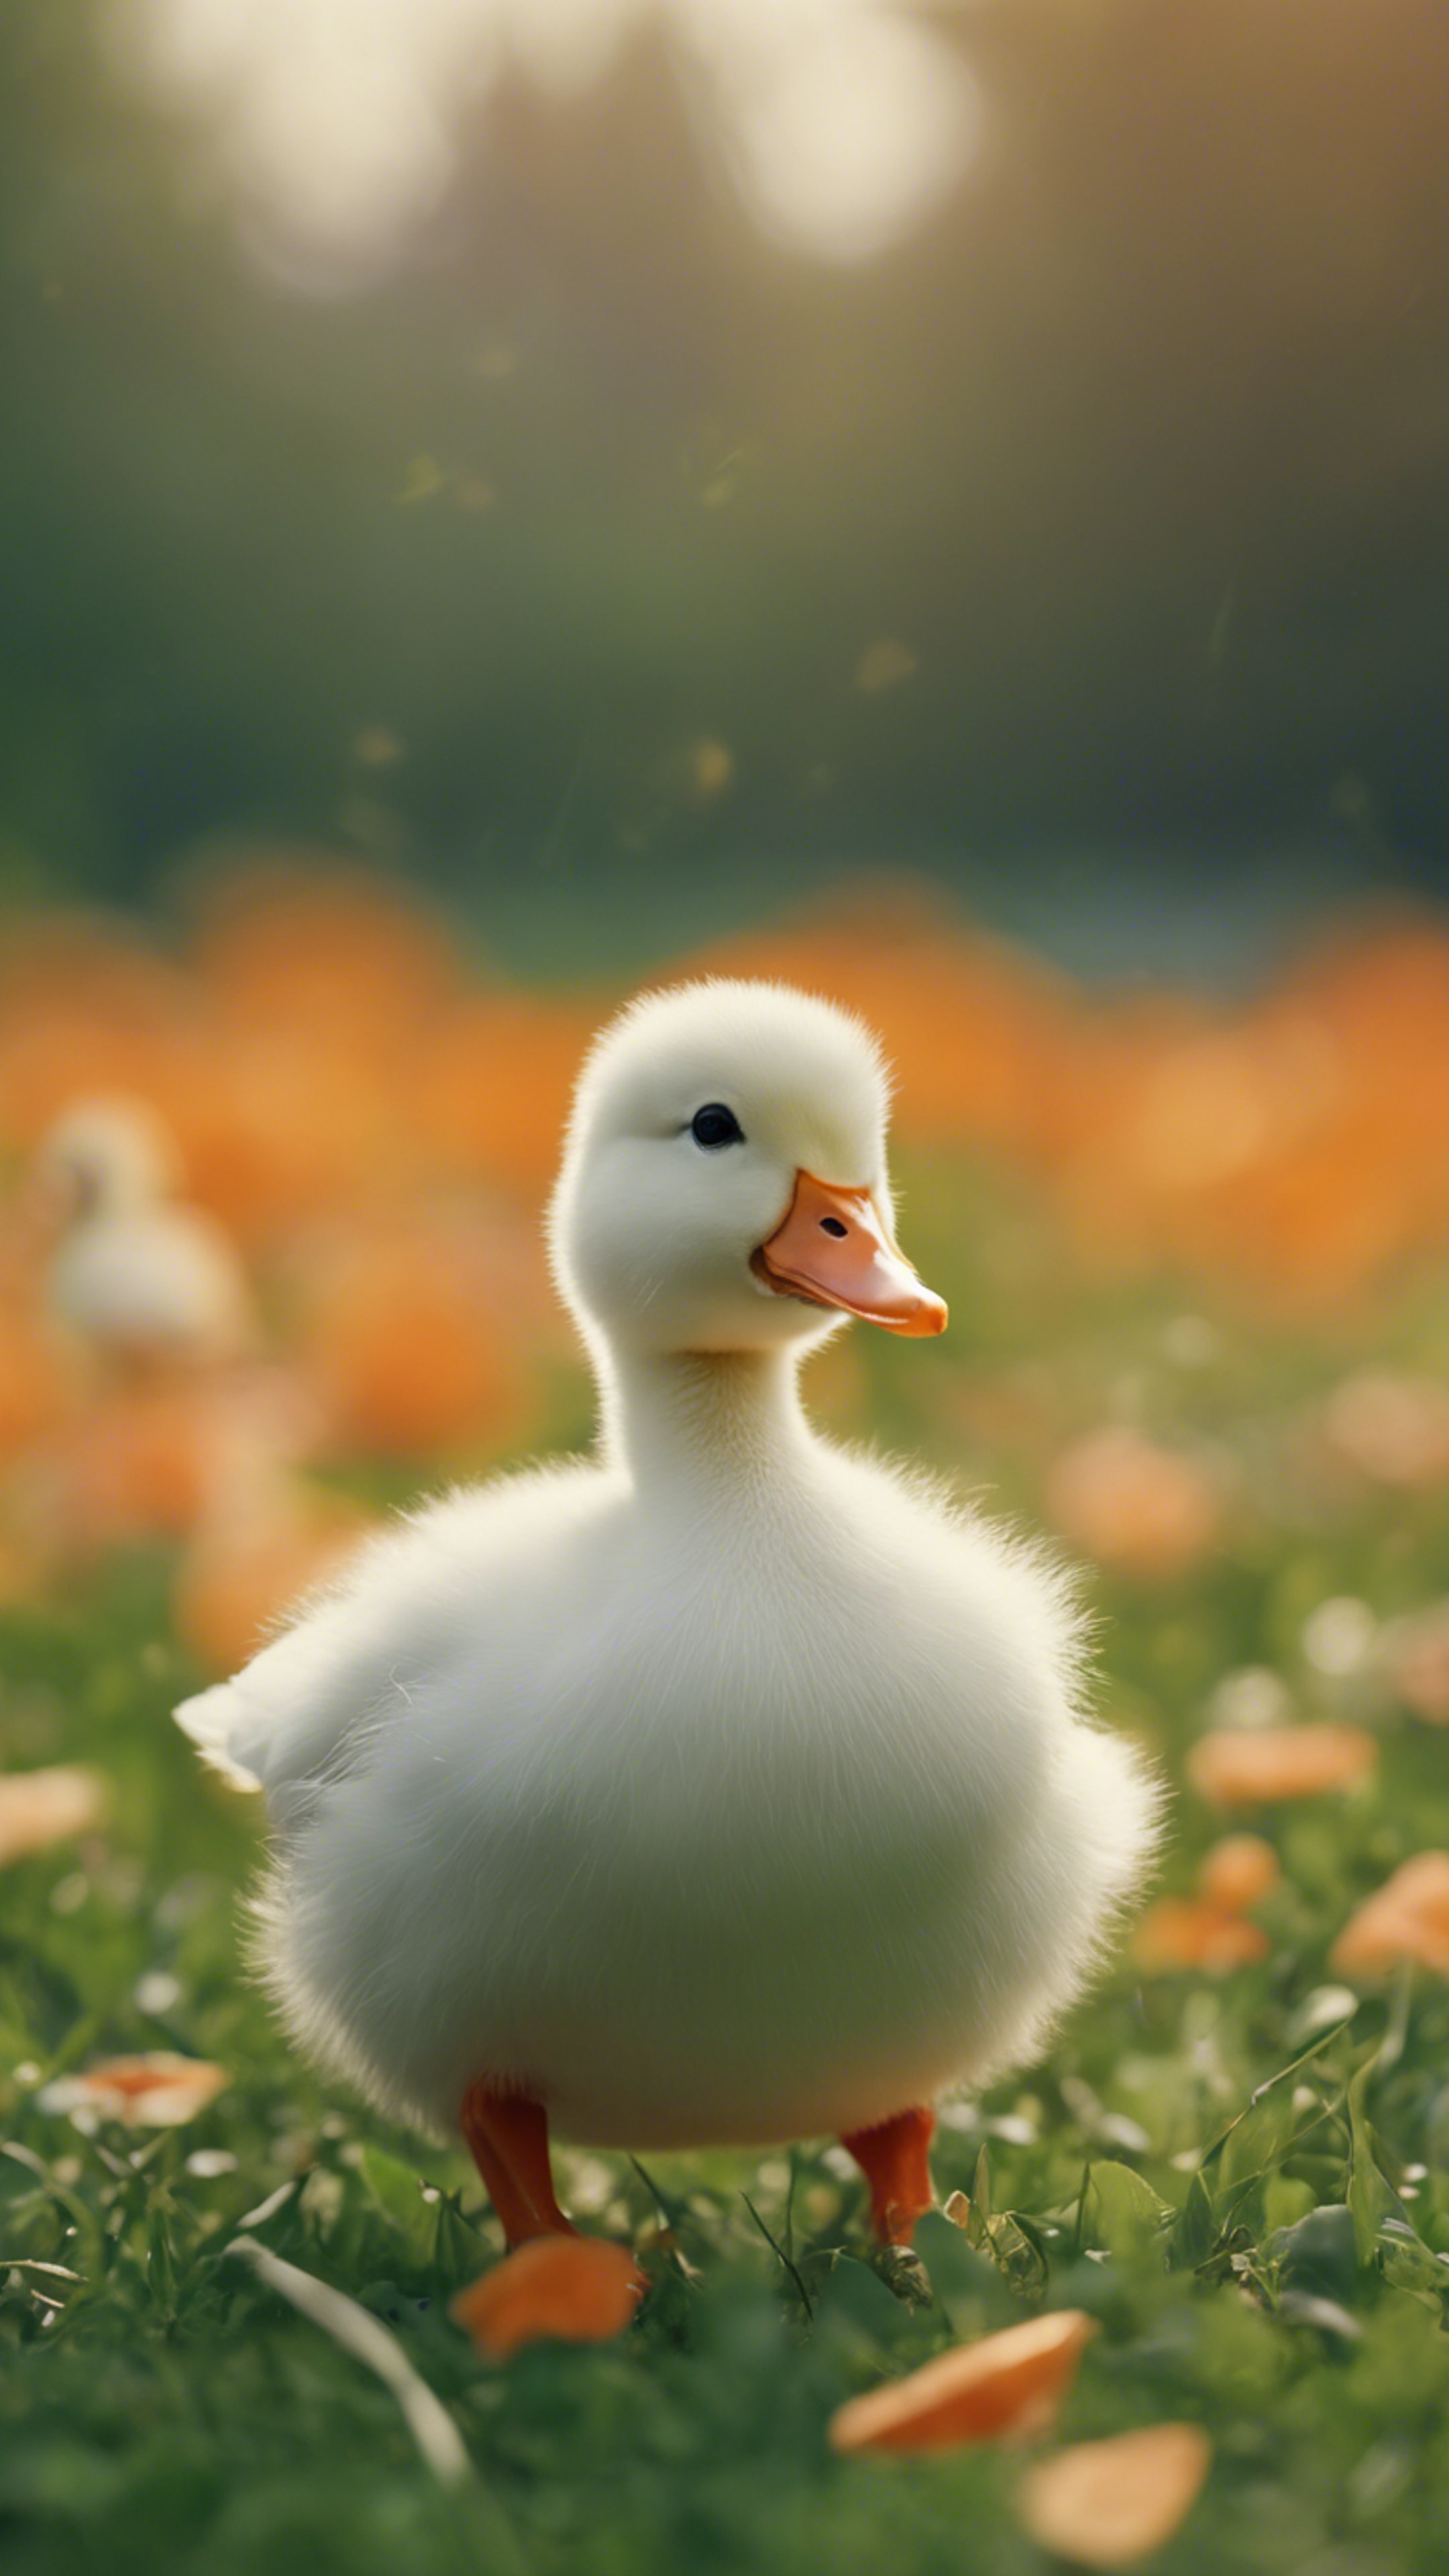 An adorable fluffy white duck with a bright orange bill is waddling happily across a green meadow. Hình nền[c976b0c80c1040dead0f]